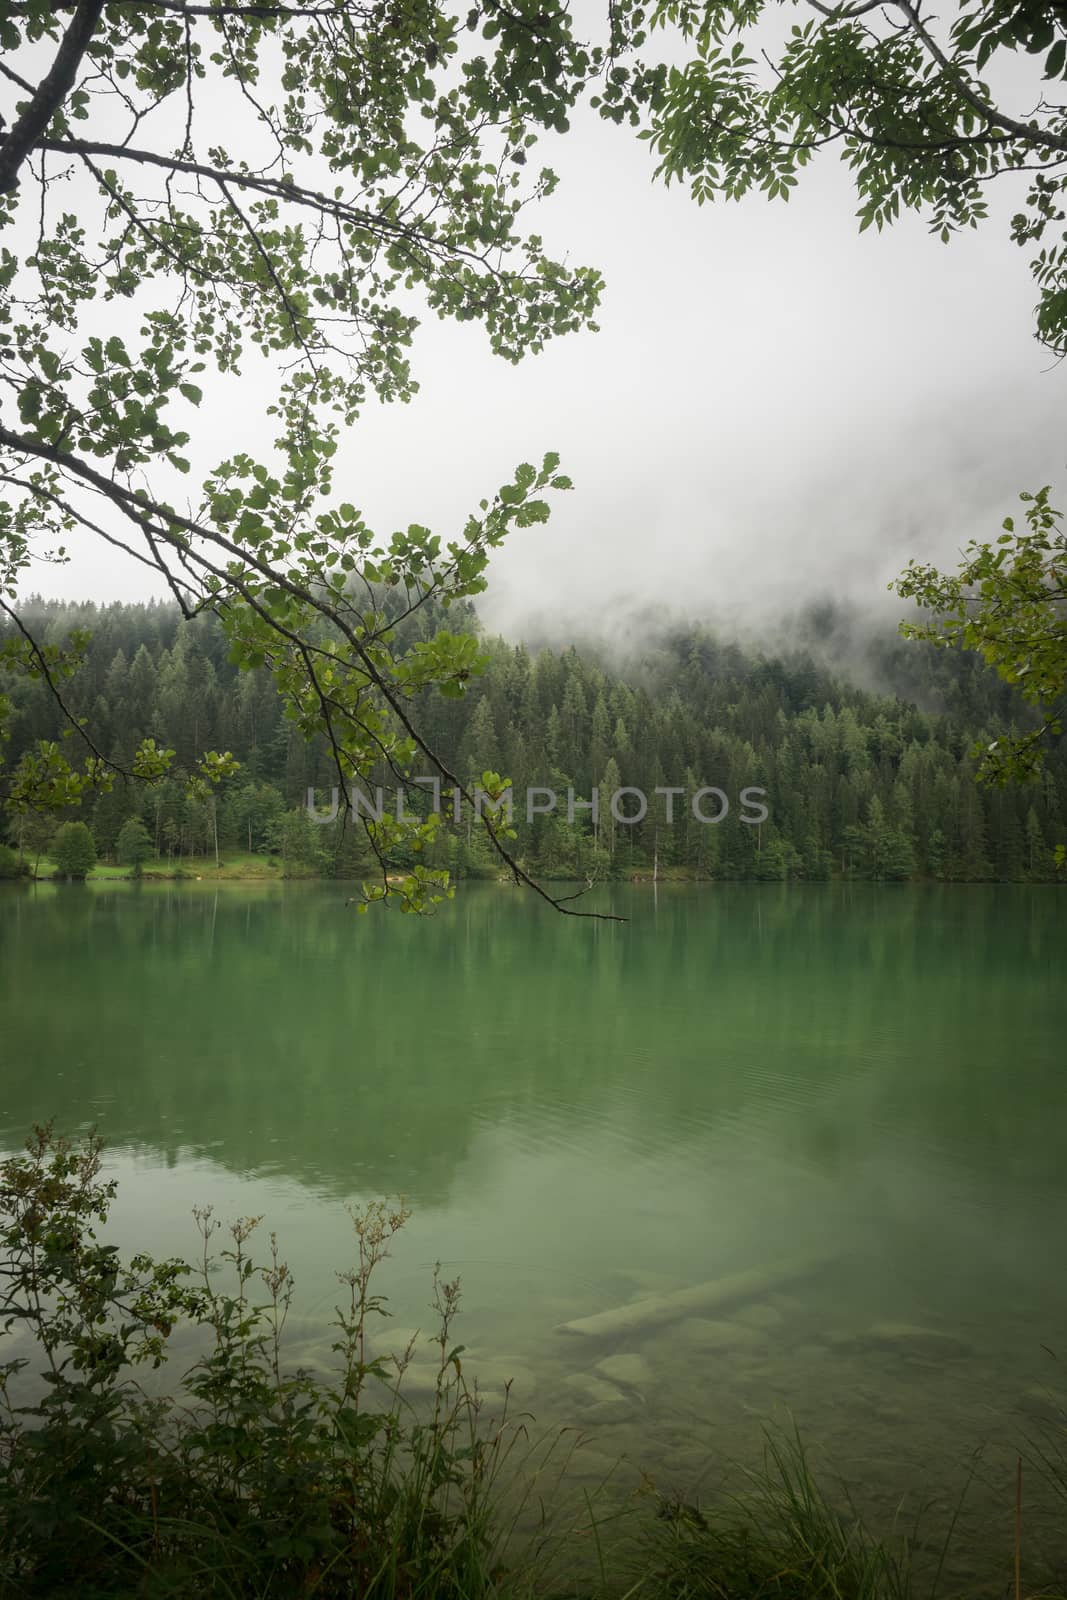 Nature shot at the Gleinkersee in Austria by sandra_fotodesign